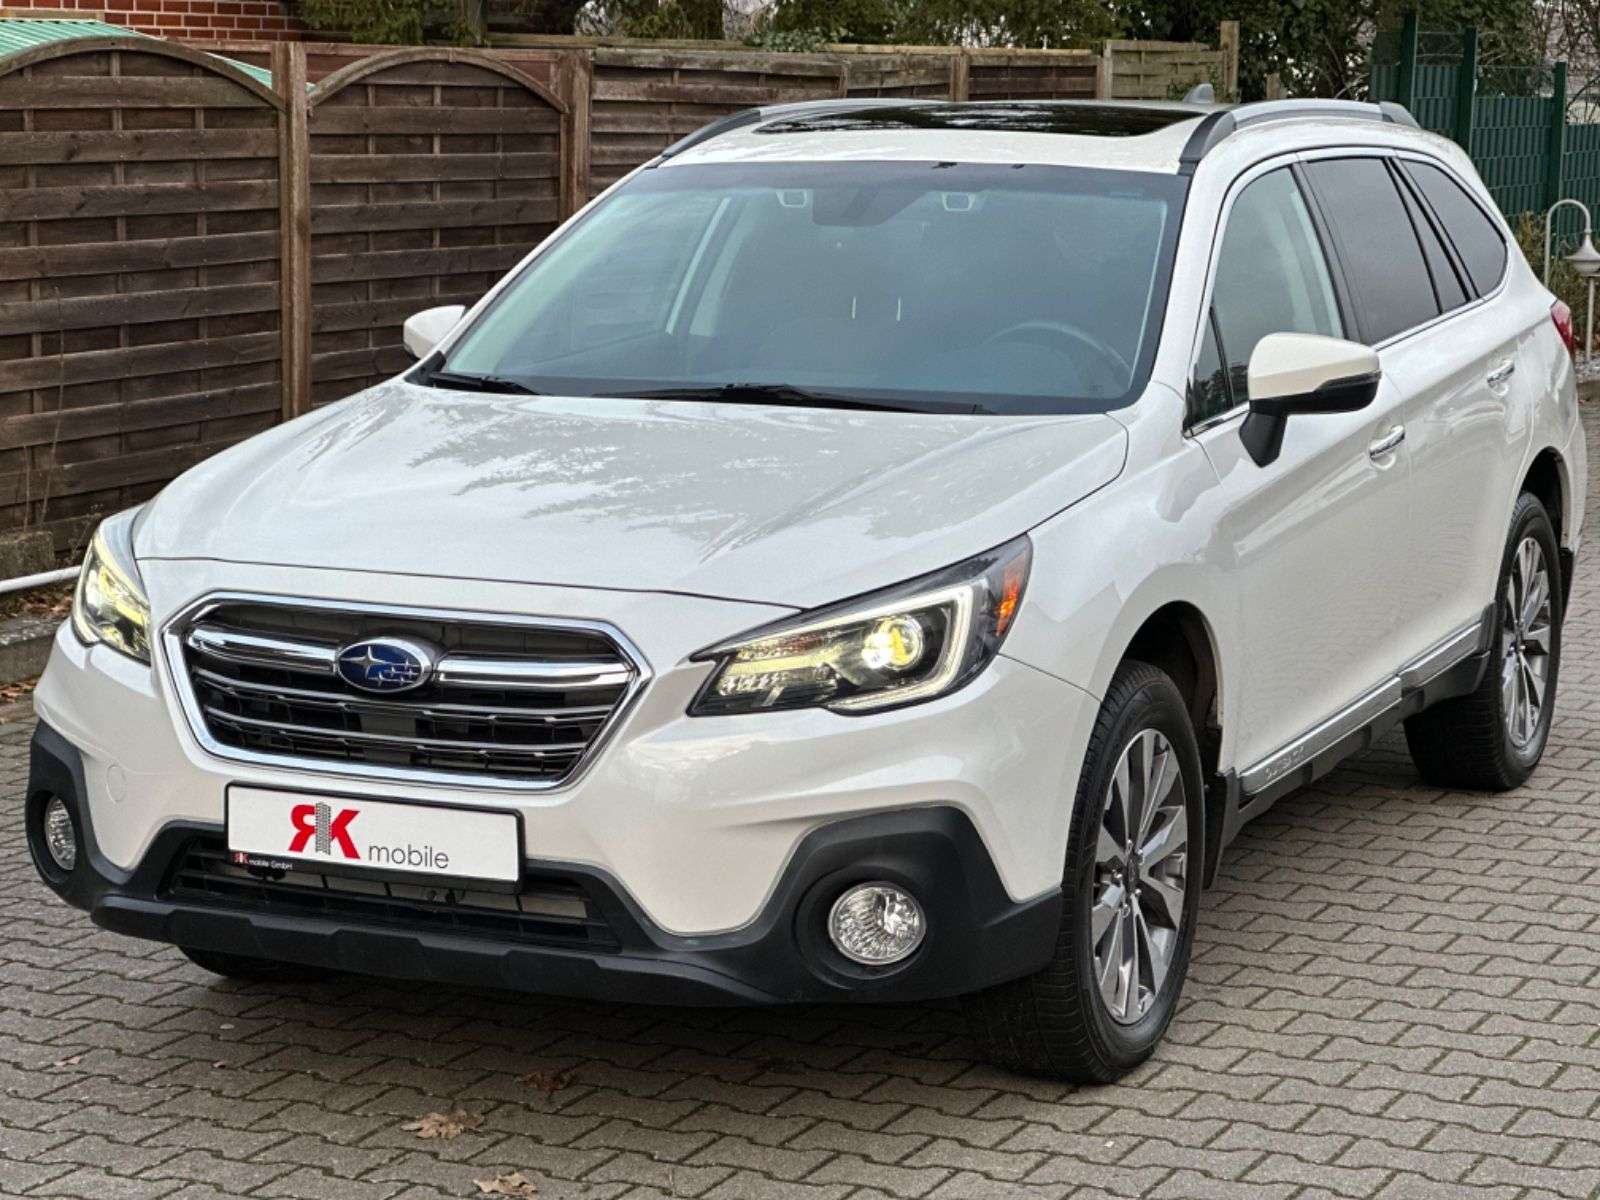 Subaru OUTBACK Station wagon in White used in Syke for € 26,900.-